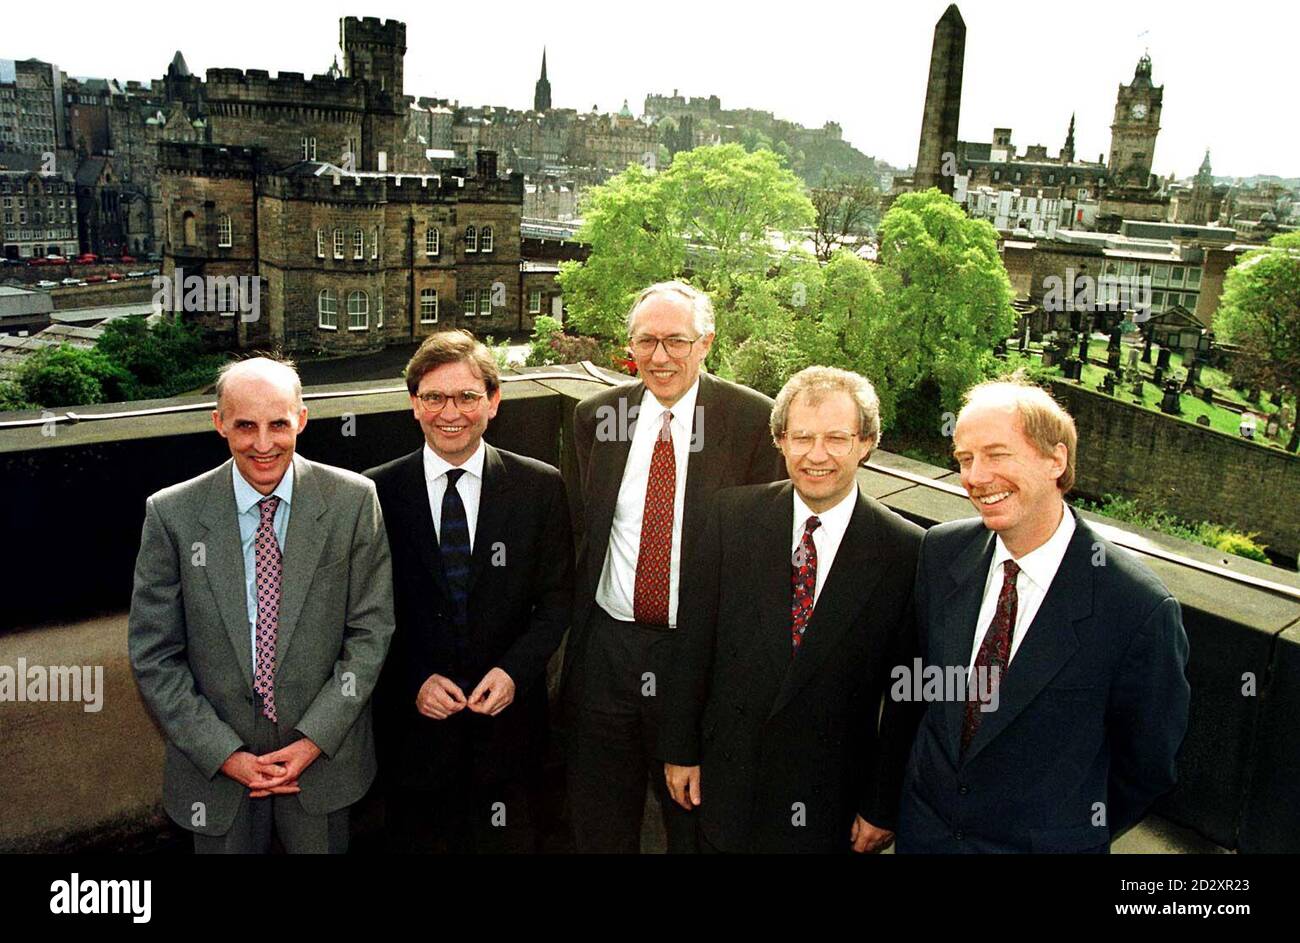 The new Scottish Office Ministers in Edinburgh today (Monday). From left to right: Sam Galbraith, Brian Wilson, RT Hon Donald Dewar, Henry McLeish & Malcolm Chisholm.    On 11/10/97, the Government announced that the controversial proposed transfer of convicted killer Jason Campbell from a Scottish jail to the Maze prison in Northern Ireland has been halted.  Dewar, who reviewed the case, said Campbell's transfer application should not have been granted and the case had  not been handled as it should have been .     PA Photo. Stock Photo